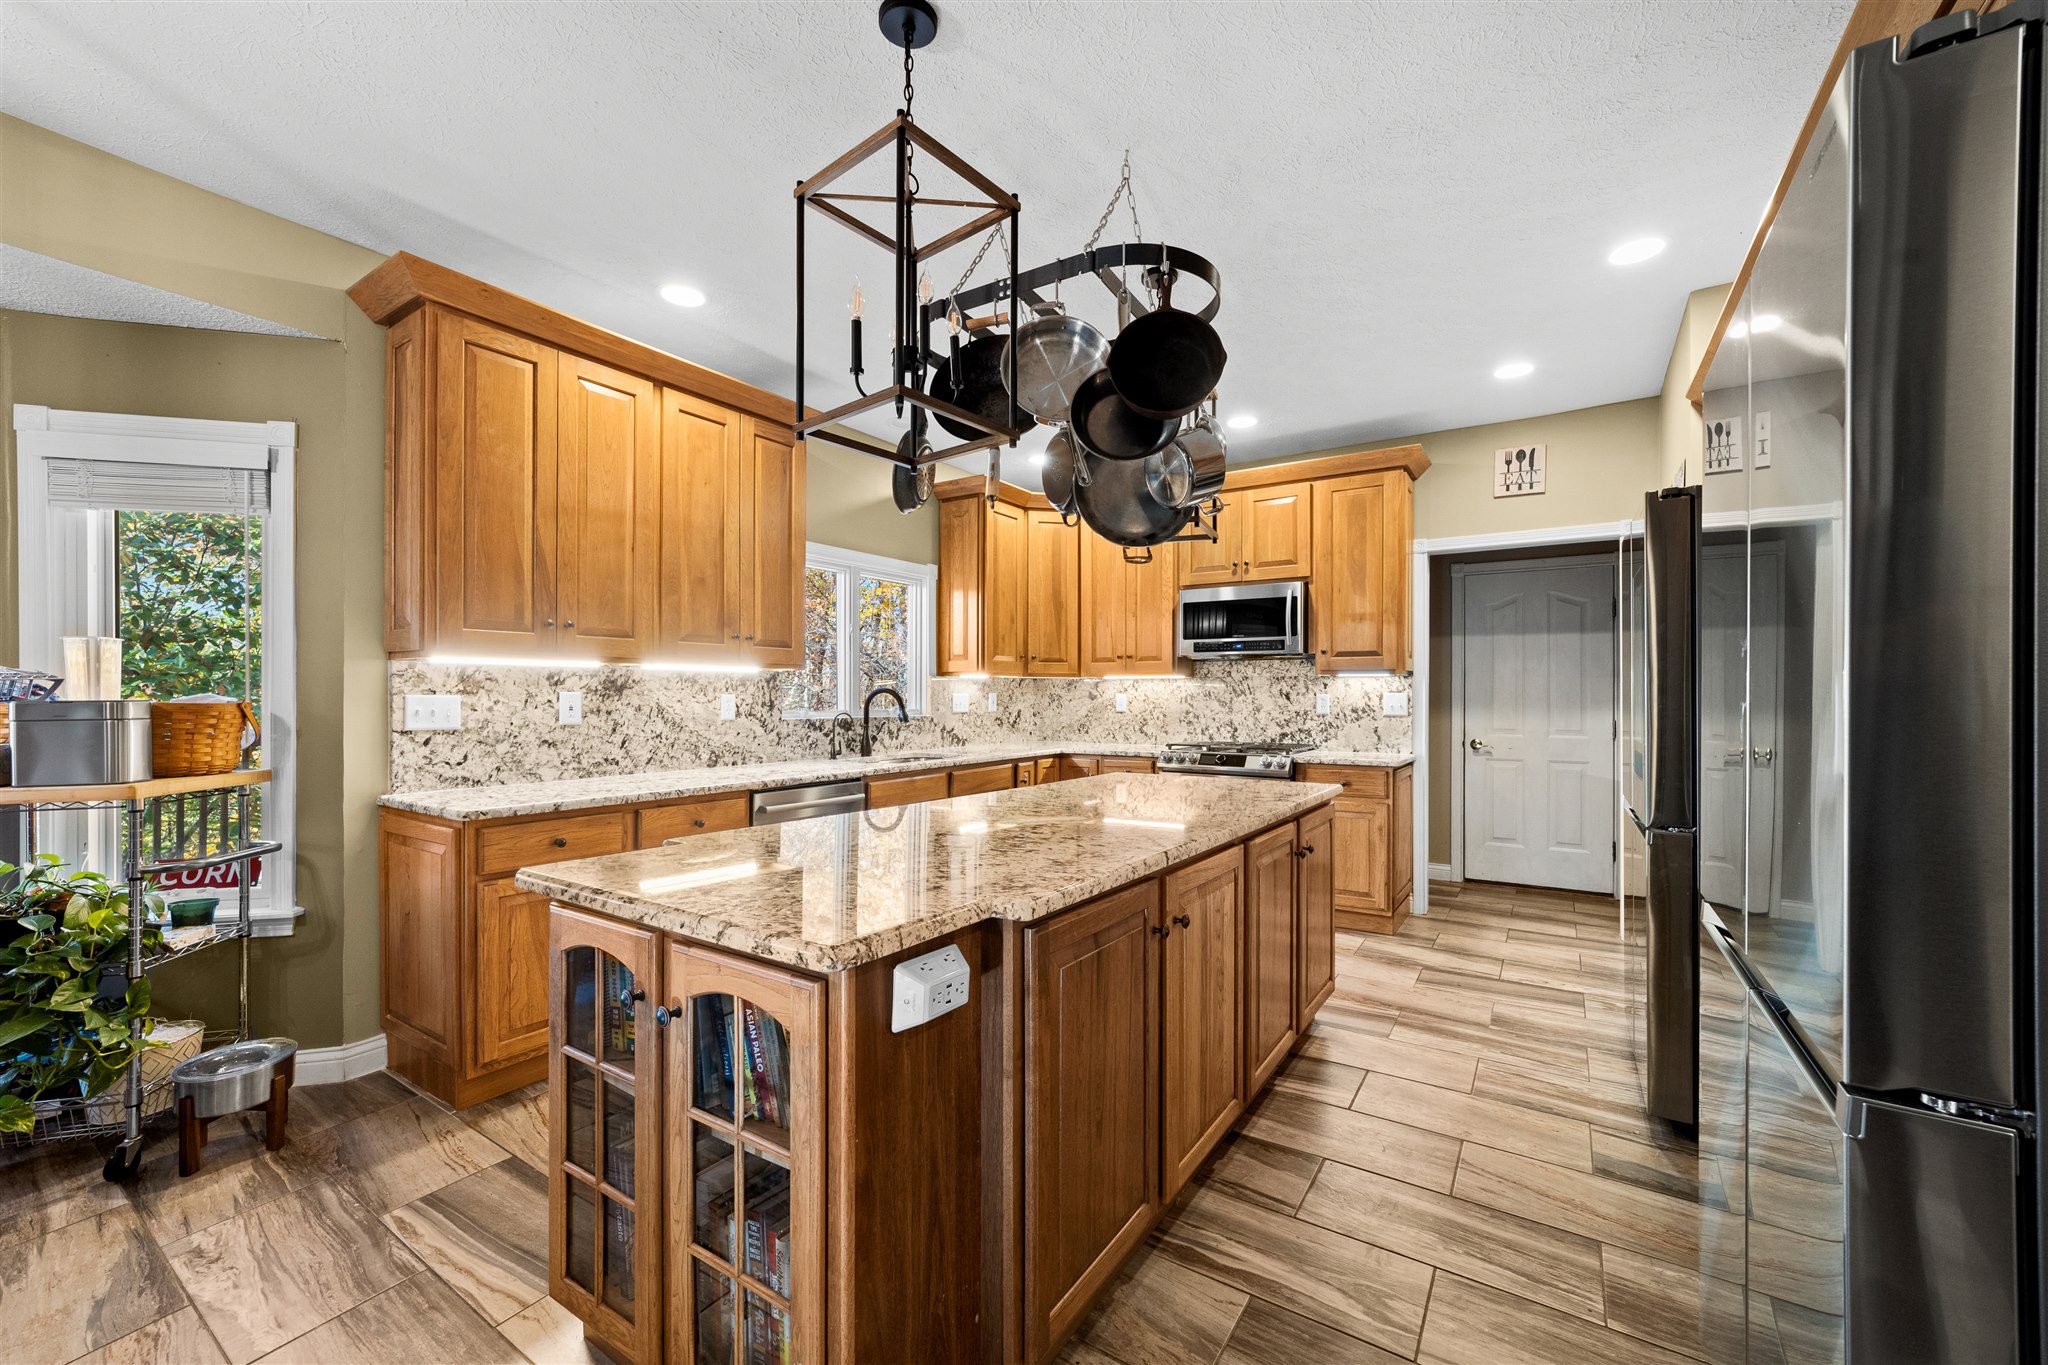 kitchens made by coors are remodeled